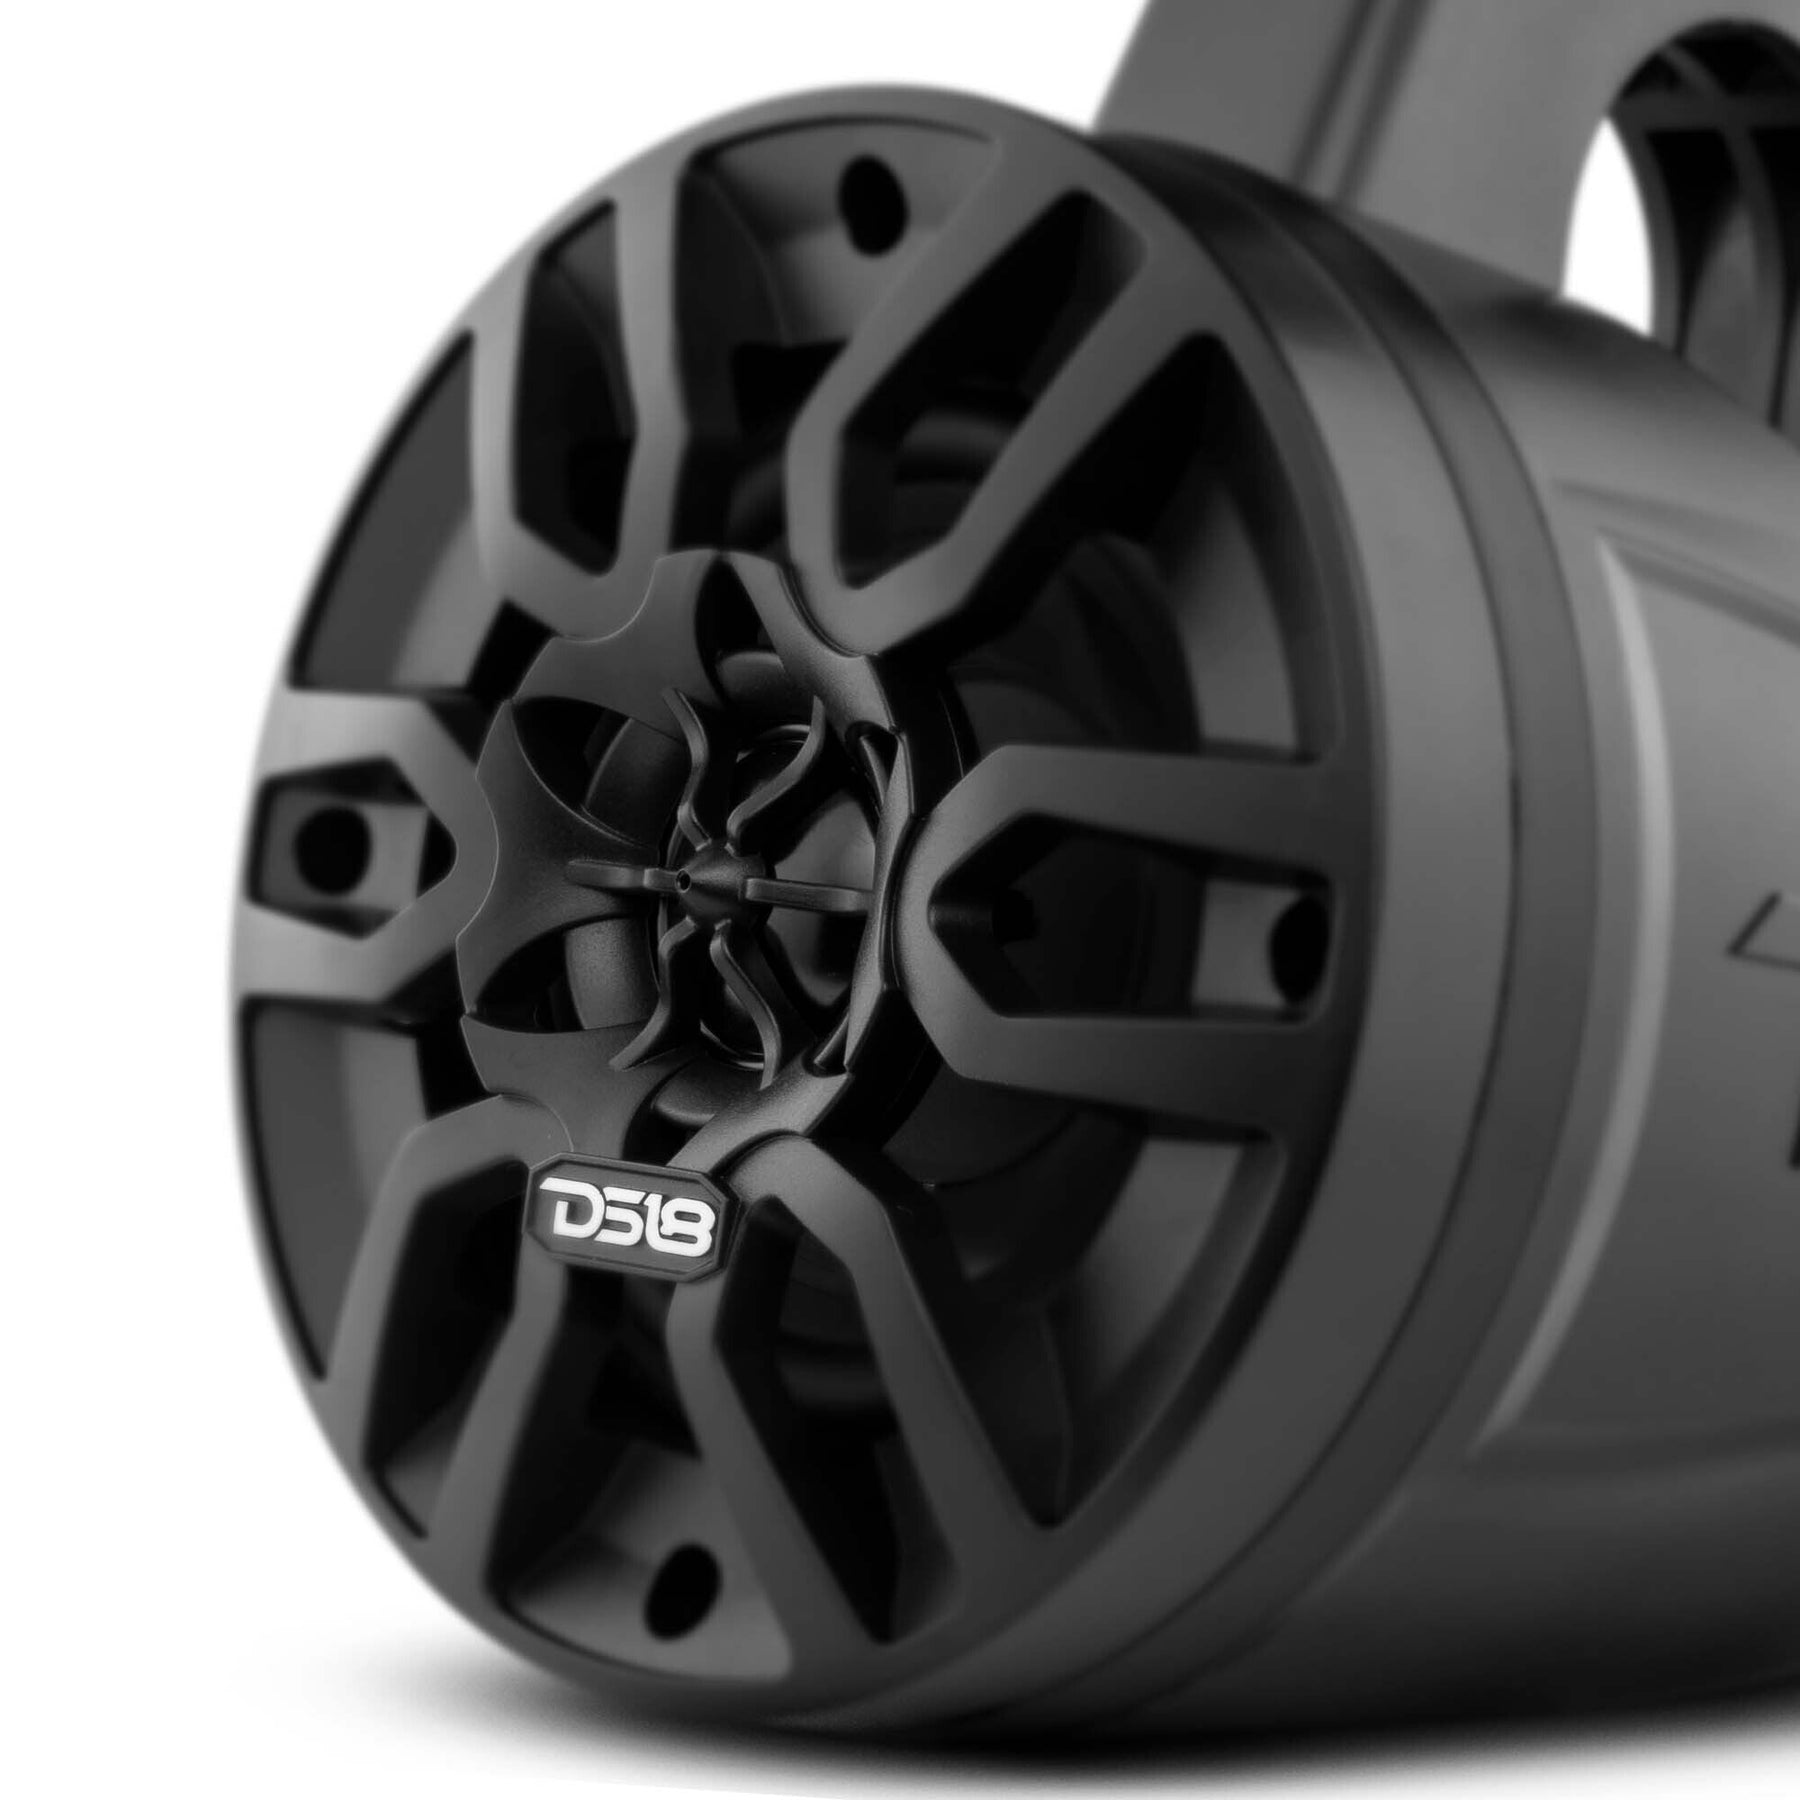 DS18 MP4TPBT HYDRO 4" Amplified With BT Marine/Wakeboard Tower Speakers 120 Watts Black. loudest marine speakers. Compatible with golf cart audio, golf cart audio systems, golf cart audio system, golf cart audio options, best golf cart audio system, golf cart audio console.